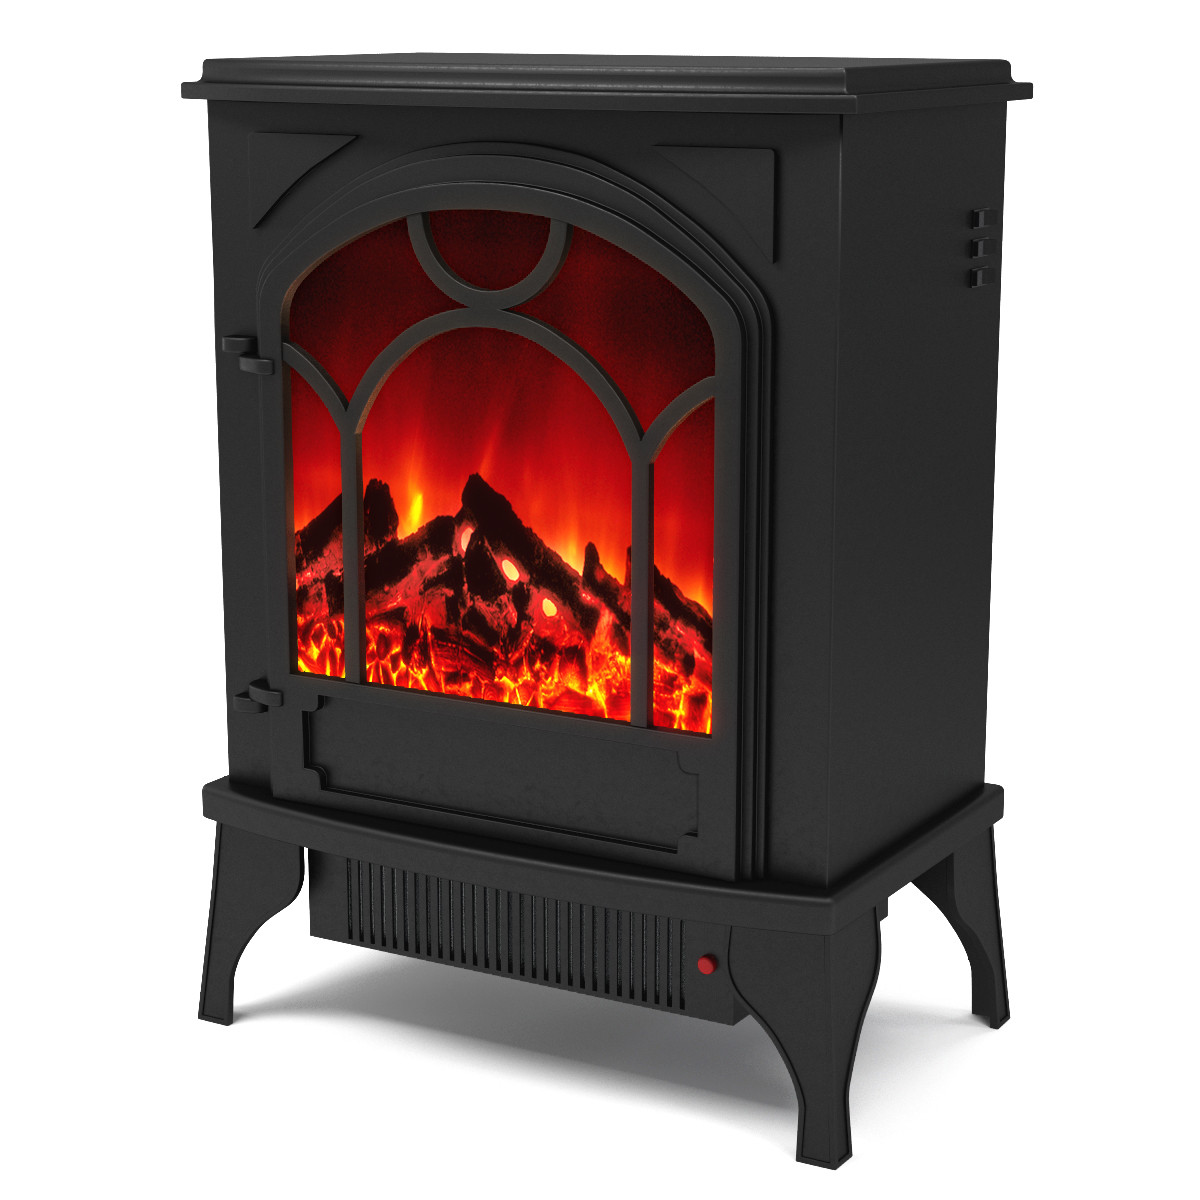 Electric Space Heaters Fireplace
 Aries Electric Fireplace Free Standing Portable Space